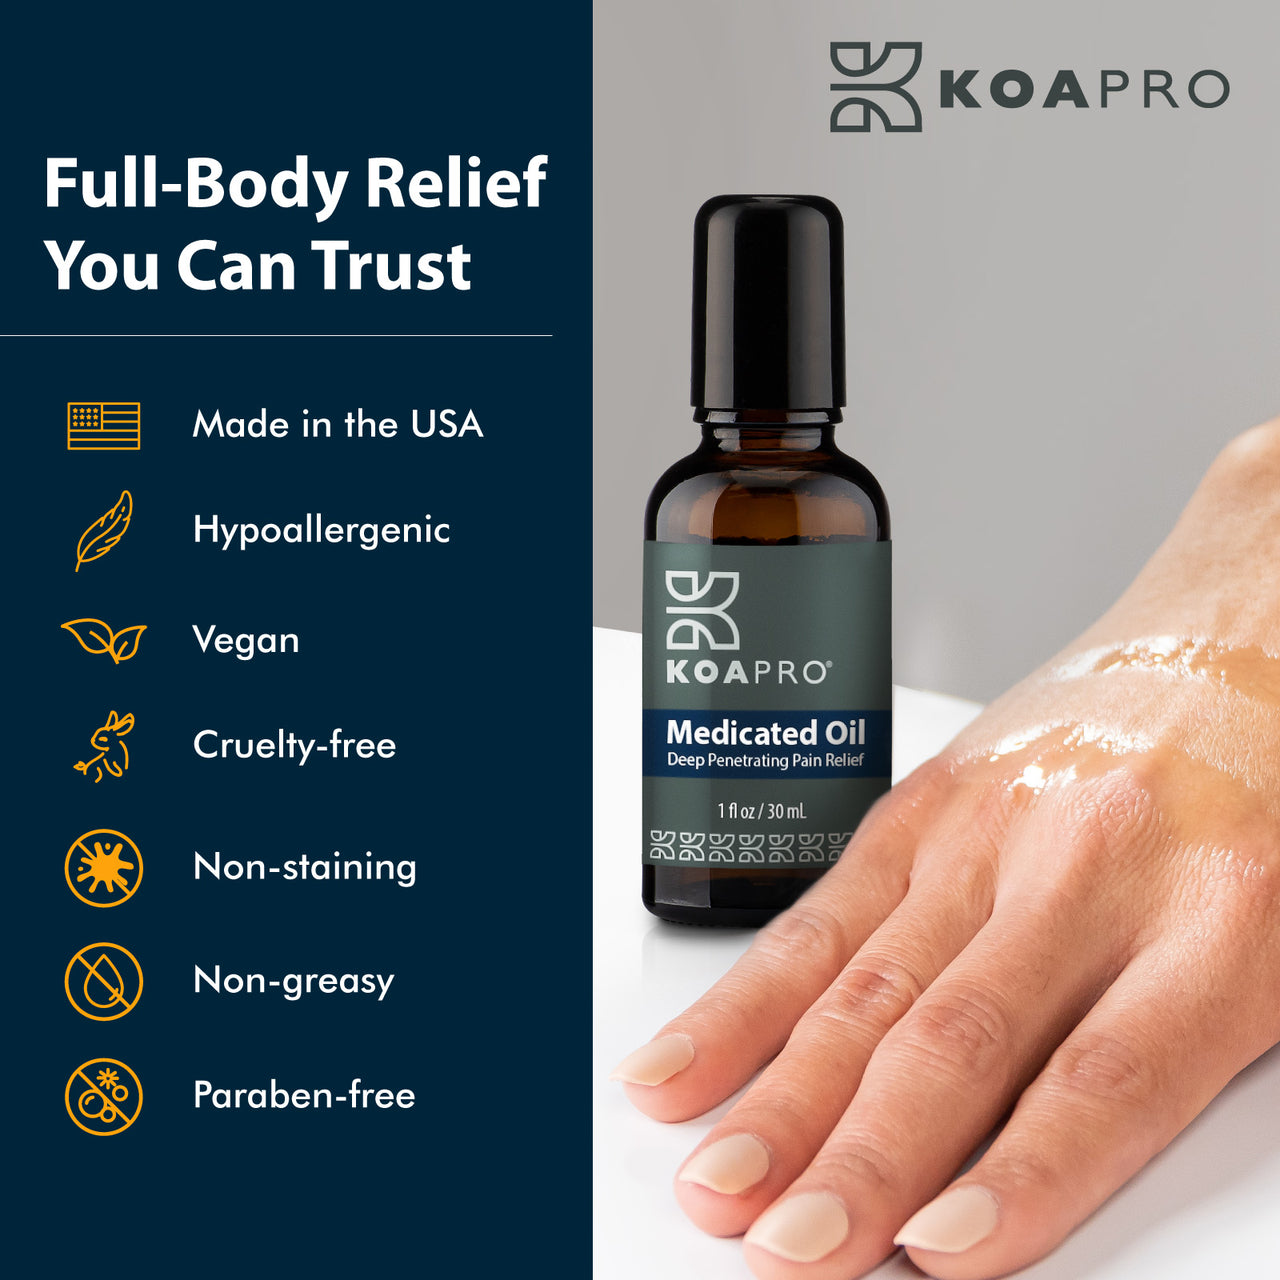 Medicated Oil: Full-Body Relief You Can Trust. Made in the USA.